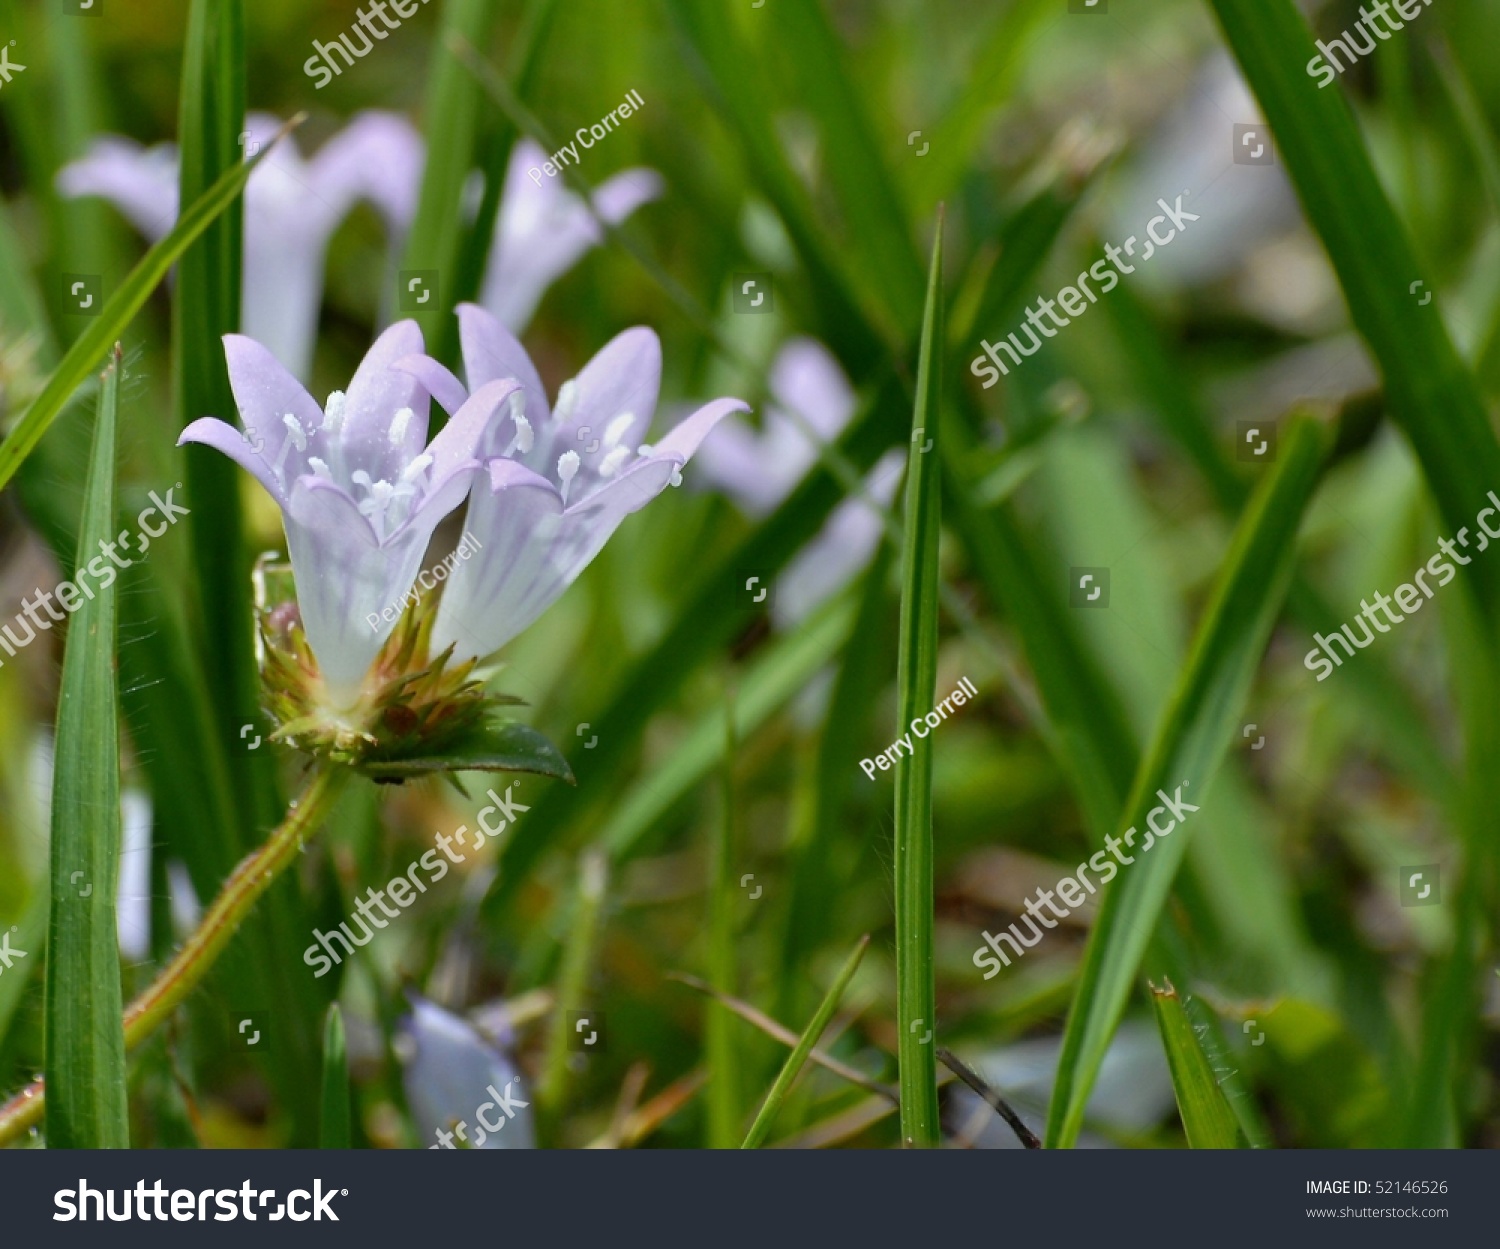 close up of delicate, lavender colored flower #52146526